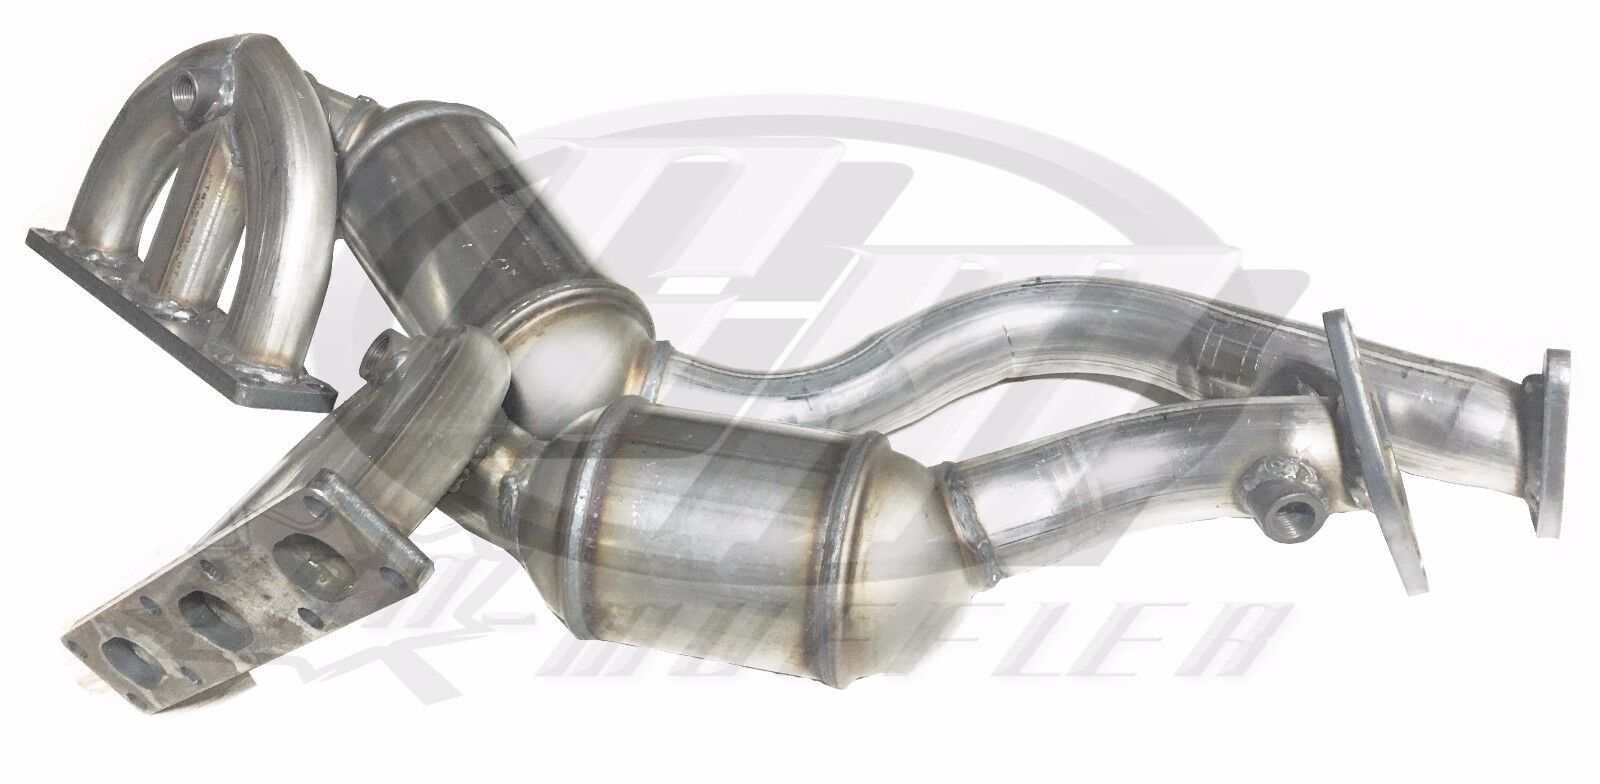 BMW 325i & 325ci Both Manifold Catalytic Converter 2001 TO 2005 20H22-16/17